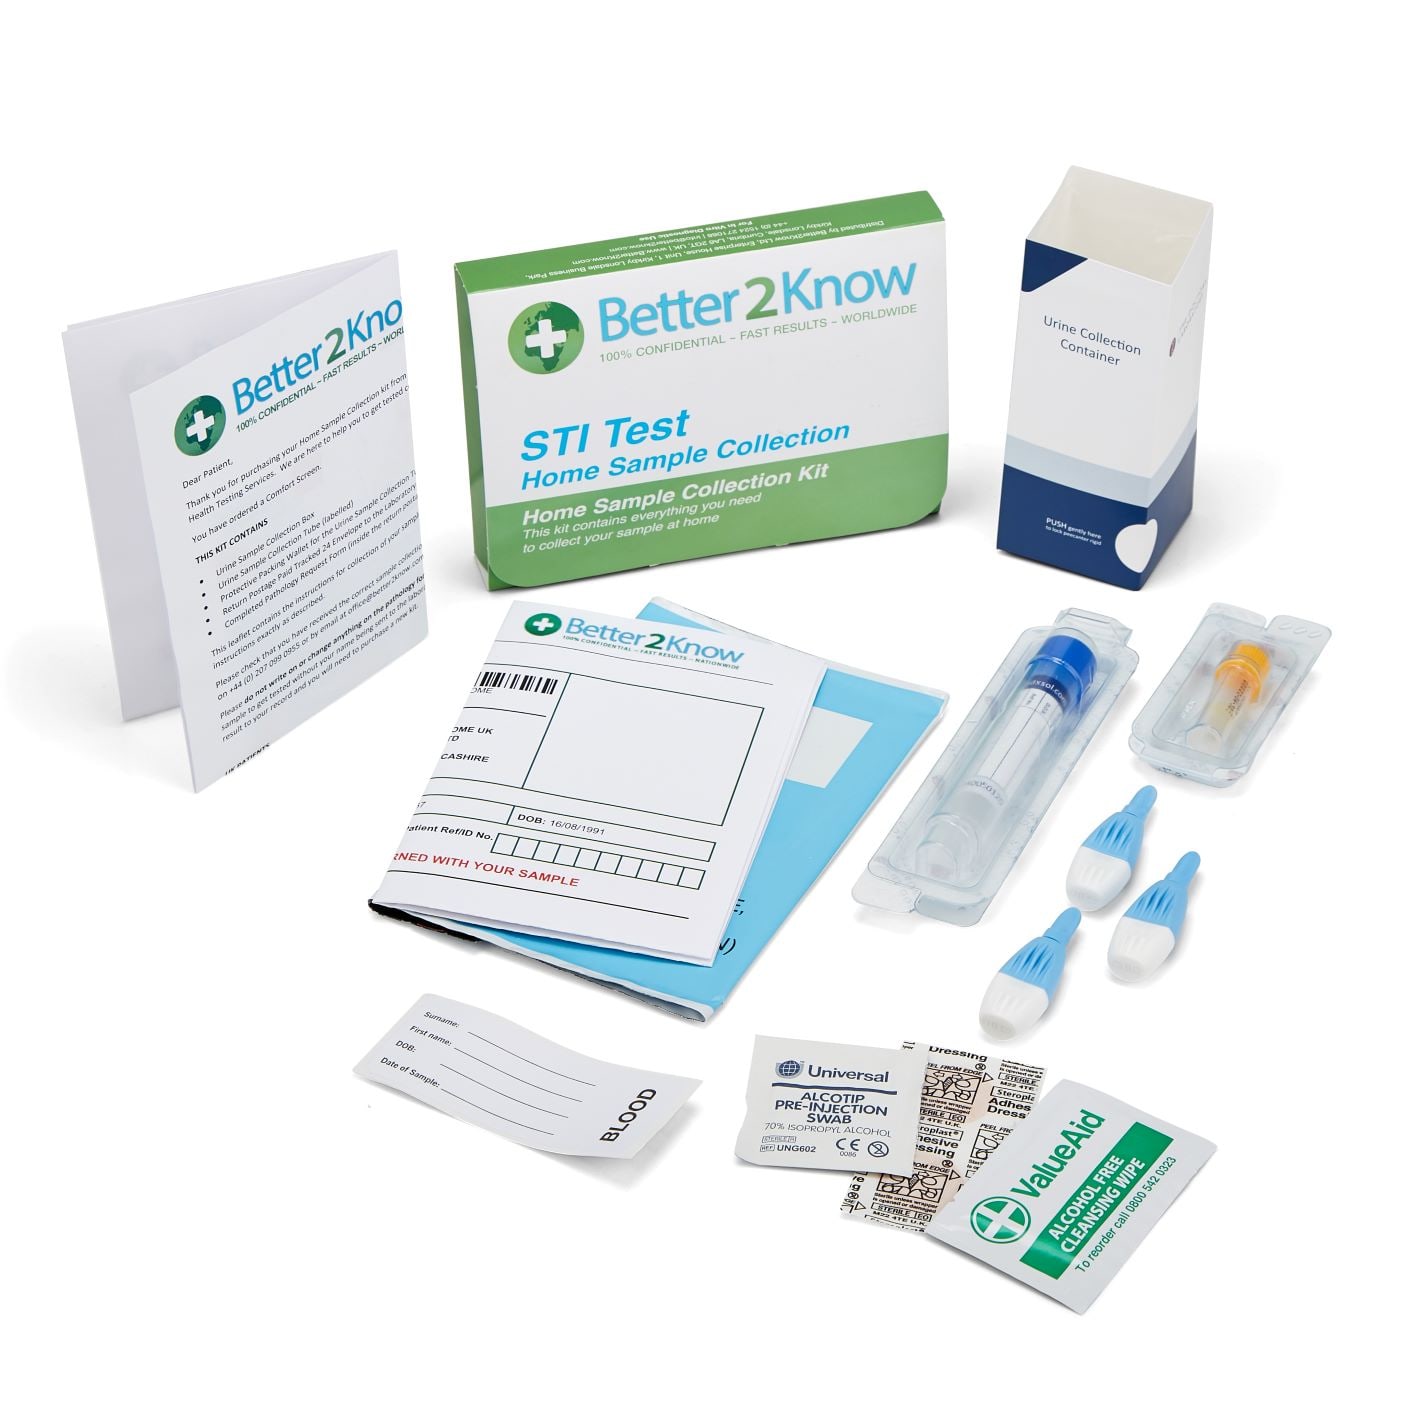 Better2Know&#039;s FAST Four Screen tests for HIV, Chlamydia, Gonorrhoea and Syphilis.